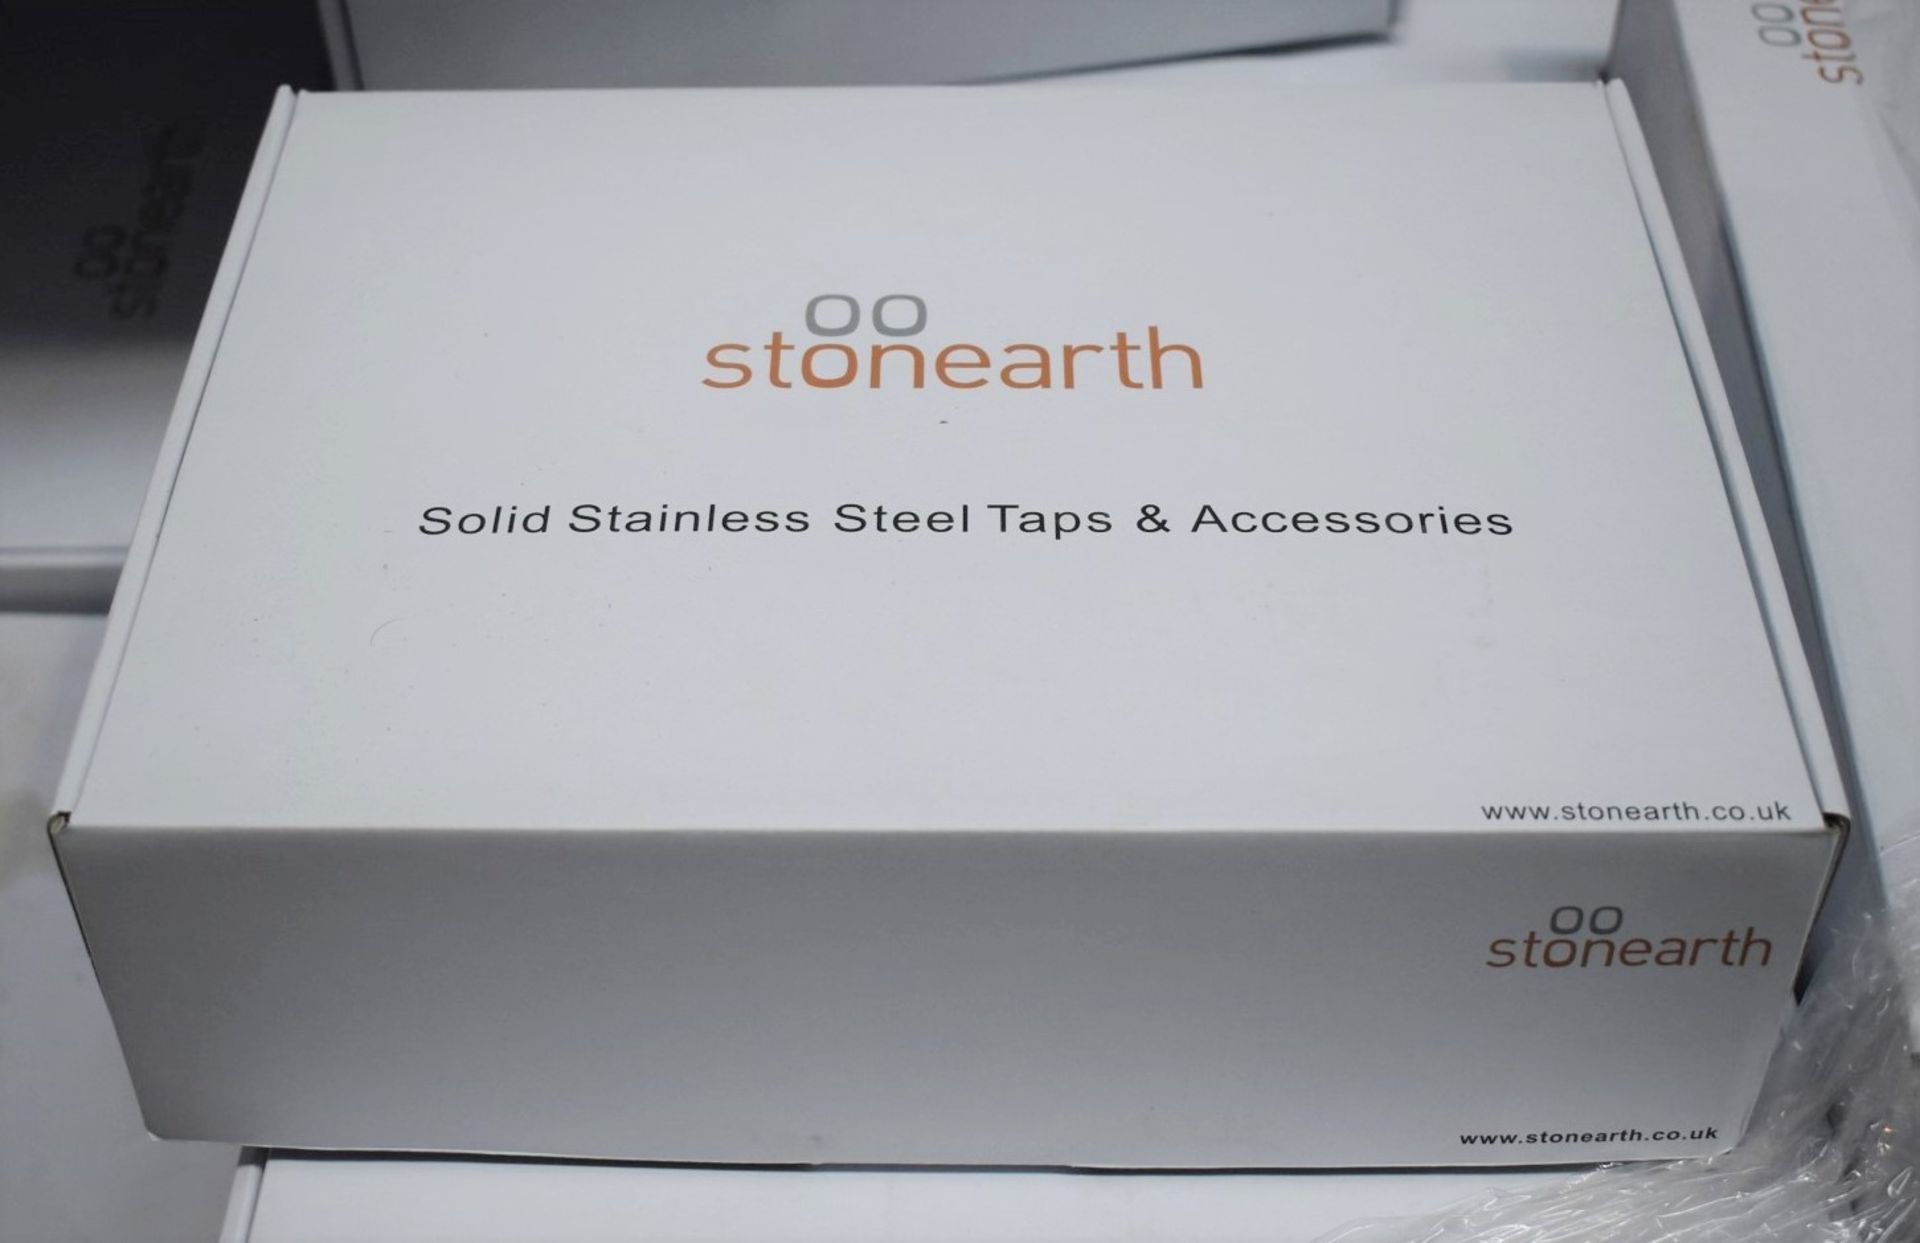 1 x Stonearth 'Metro' Stainless Steel Basin Mixer Tap - Brand New & Boxed - RRP £245 - Ref: TP821 - Image 4 of 13